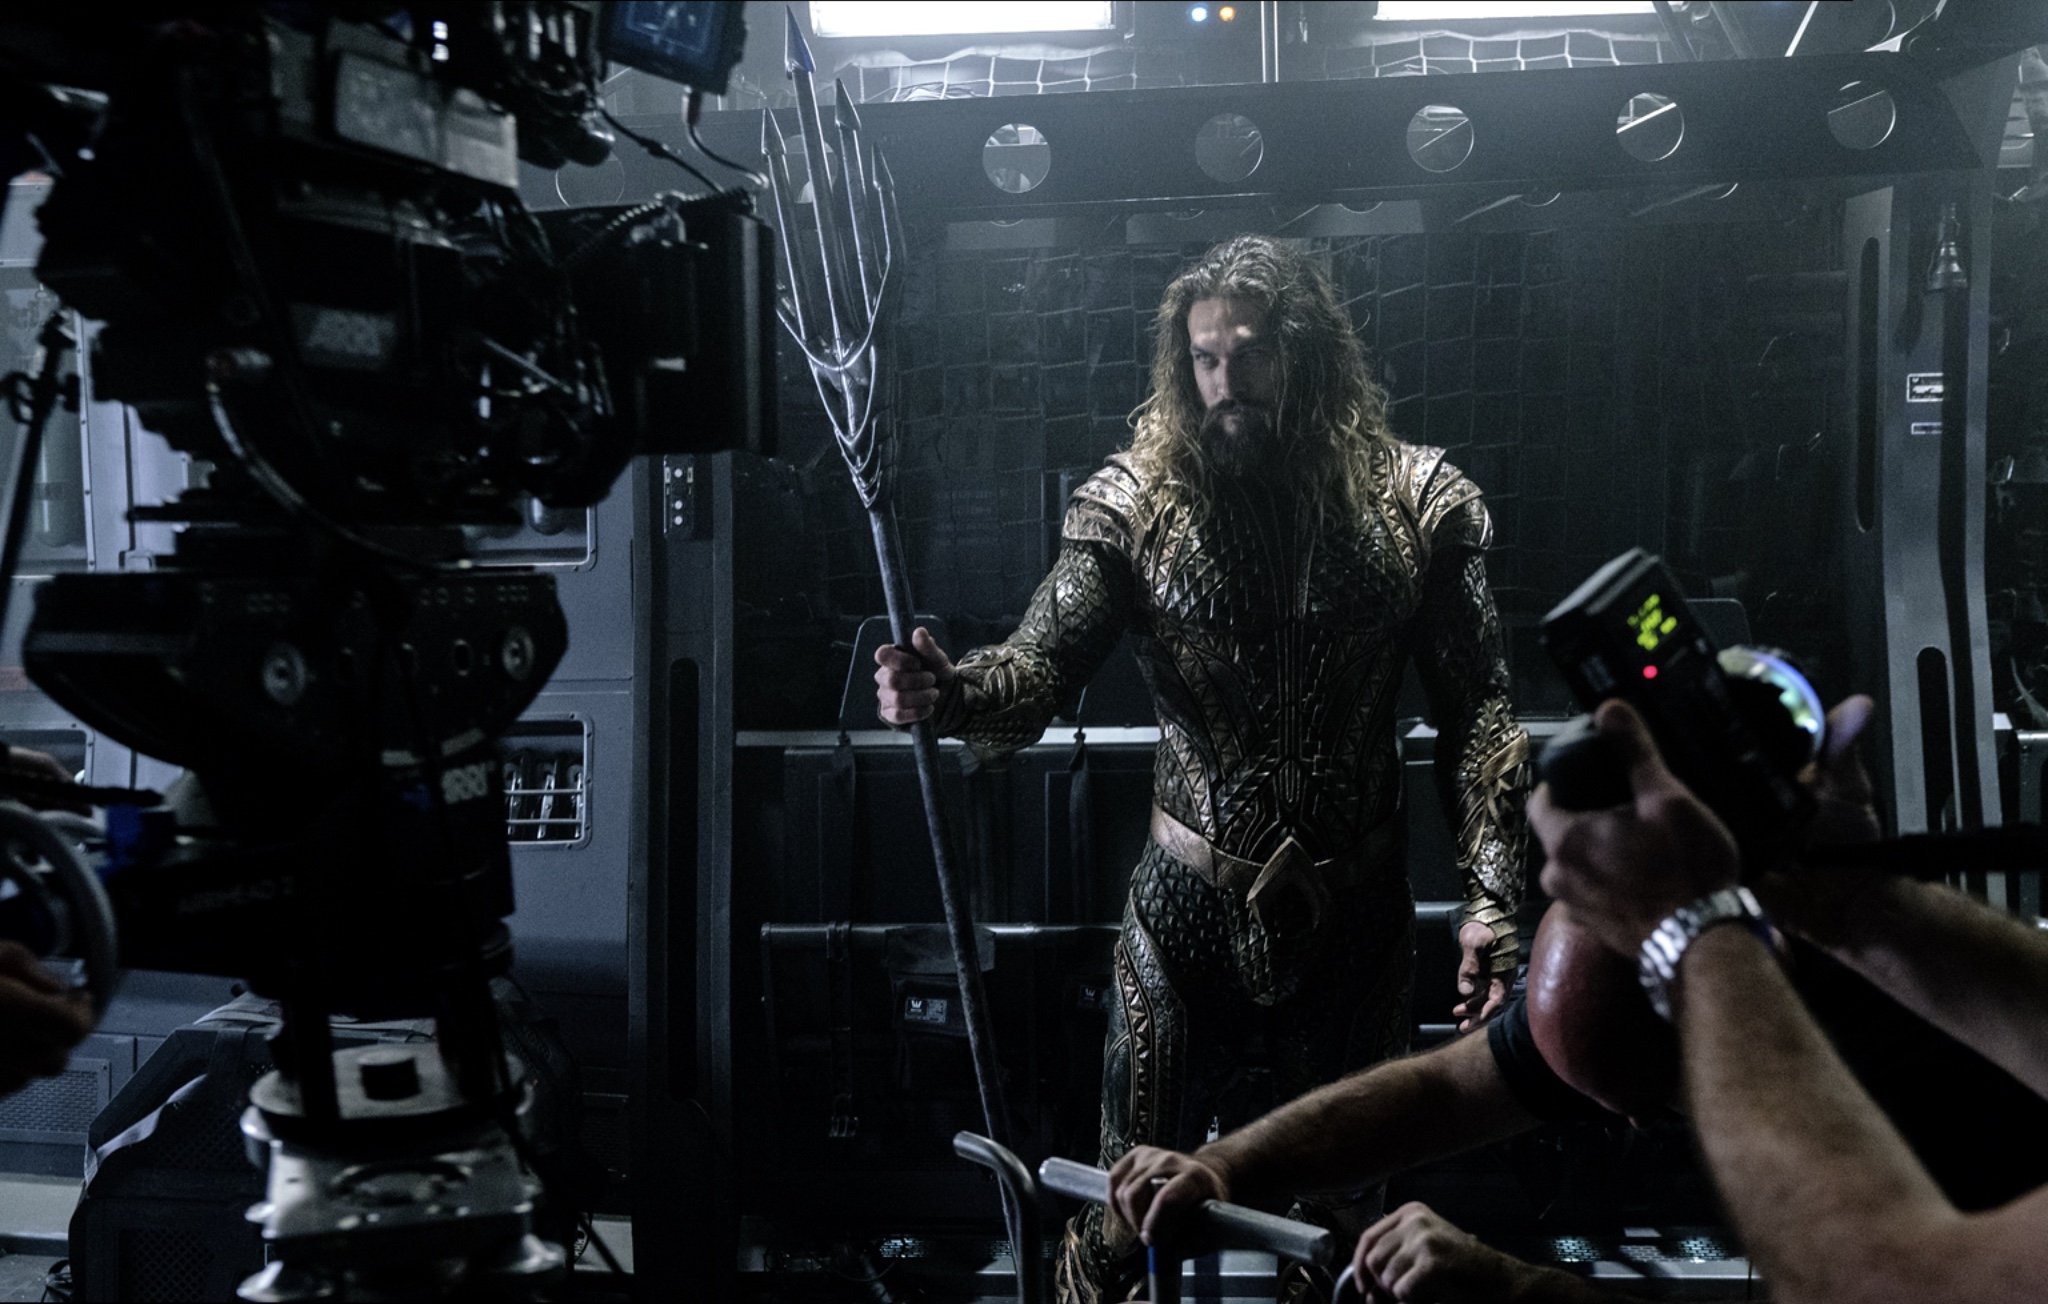 Justice League Movie High-Res Images From Empire Magazine | Cosmic Book News2048 x 1304